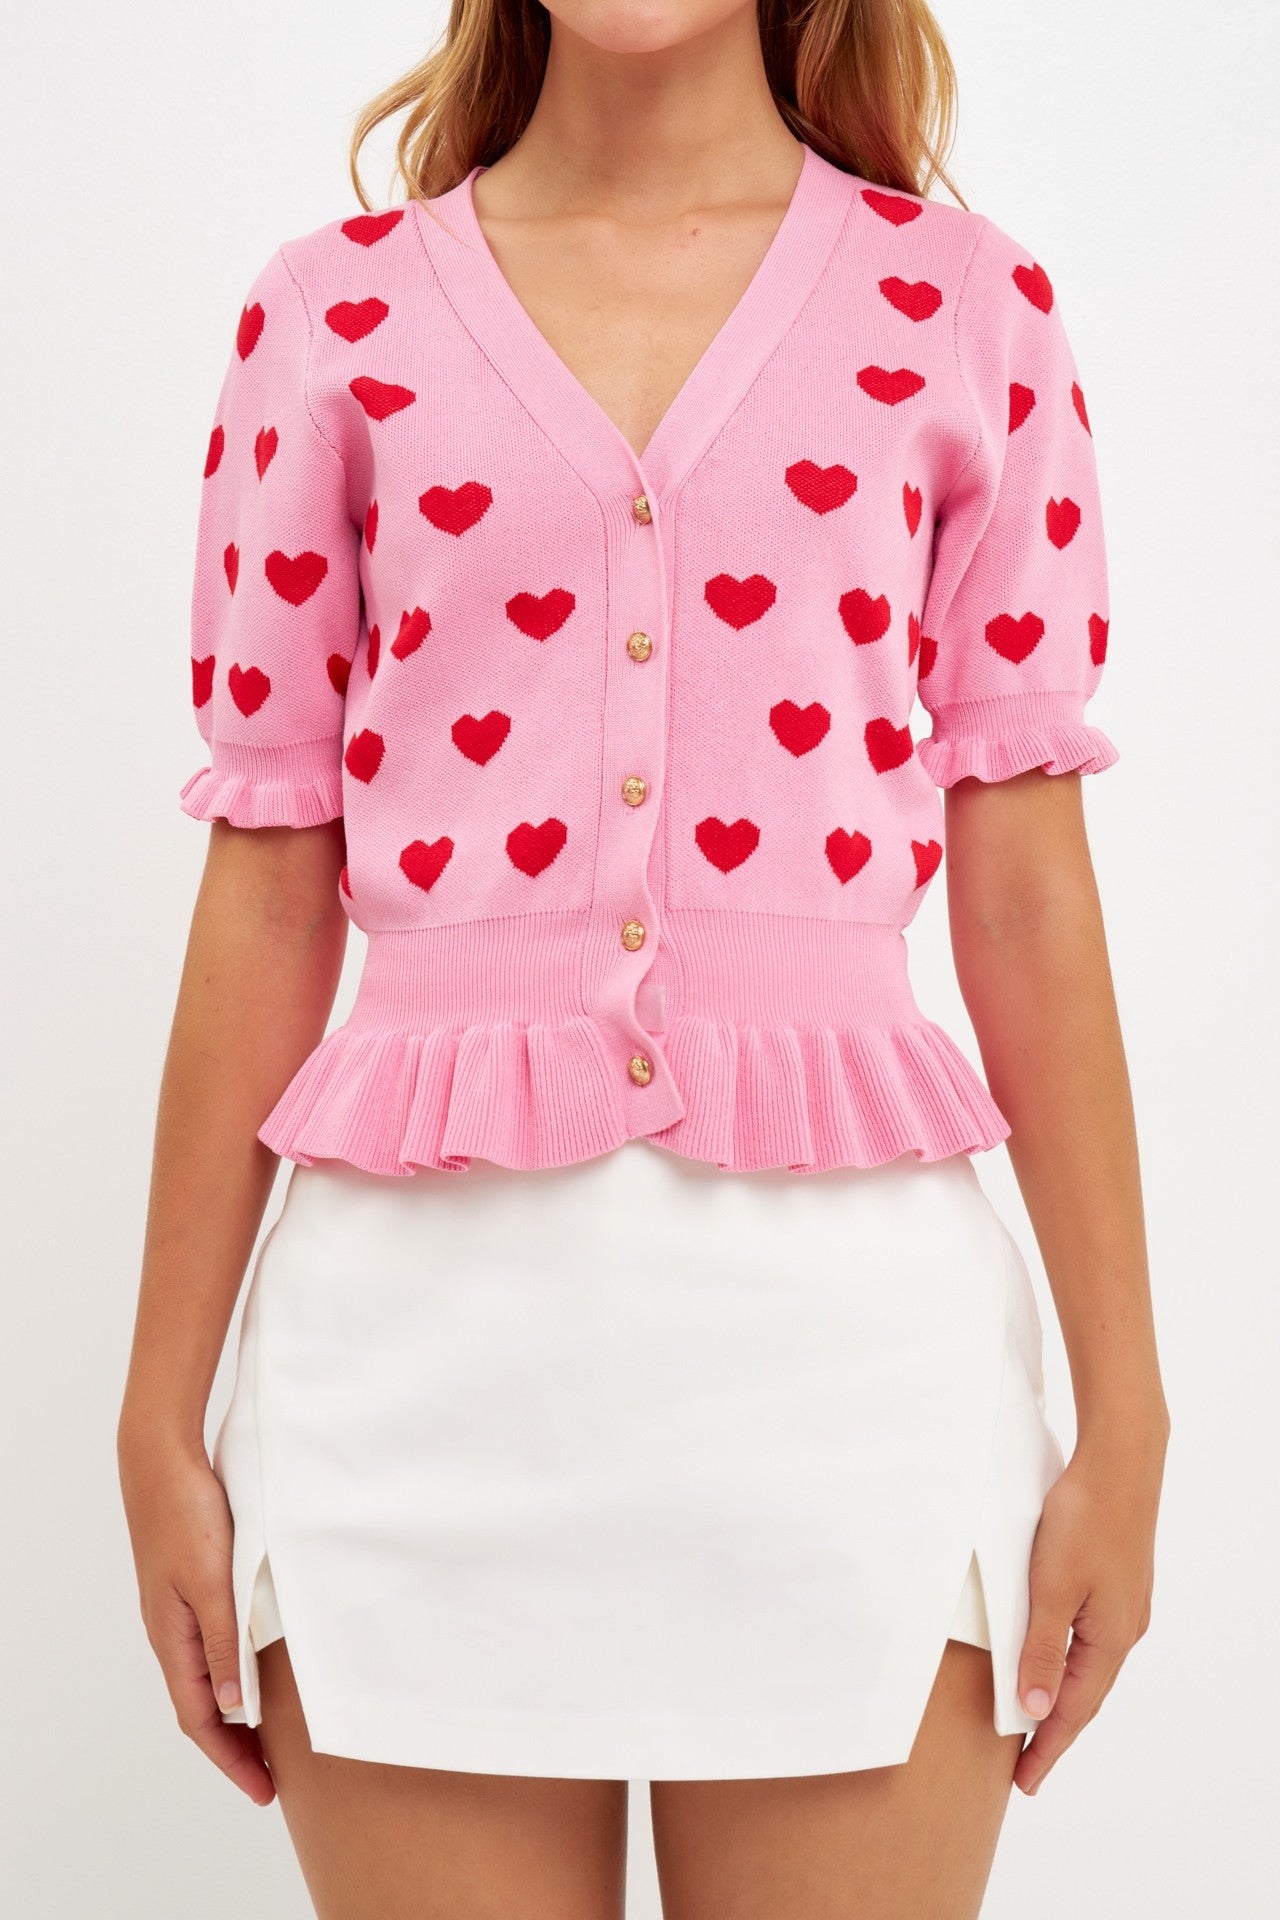 Close-up view of Corazon Peplum Cardi by English Factory in Pink